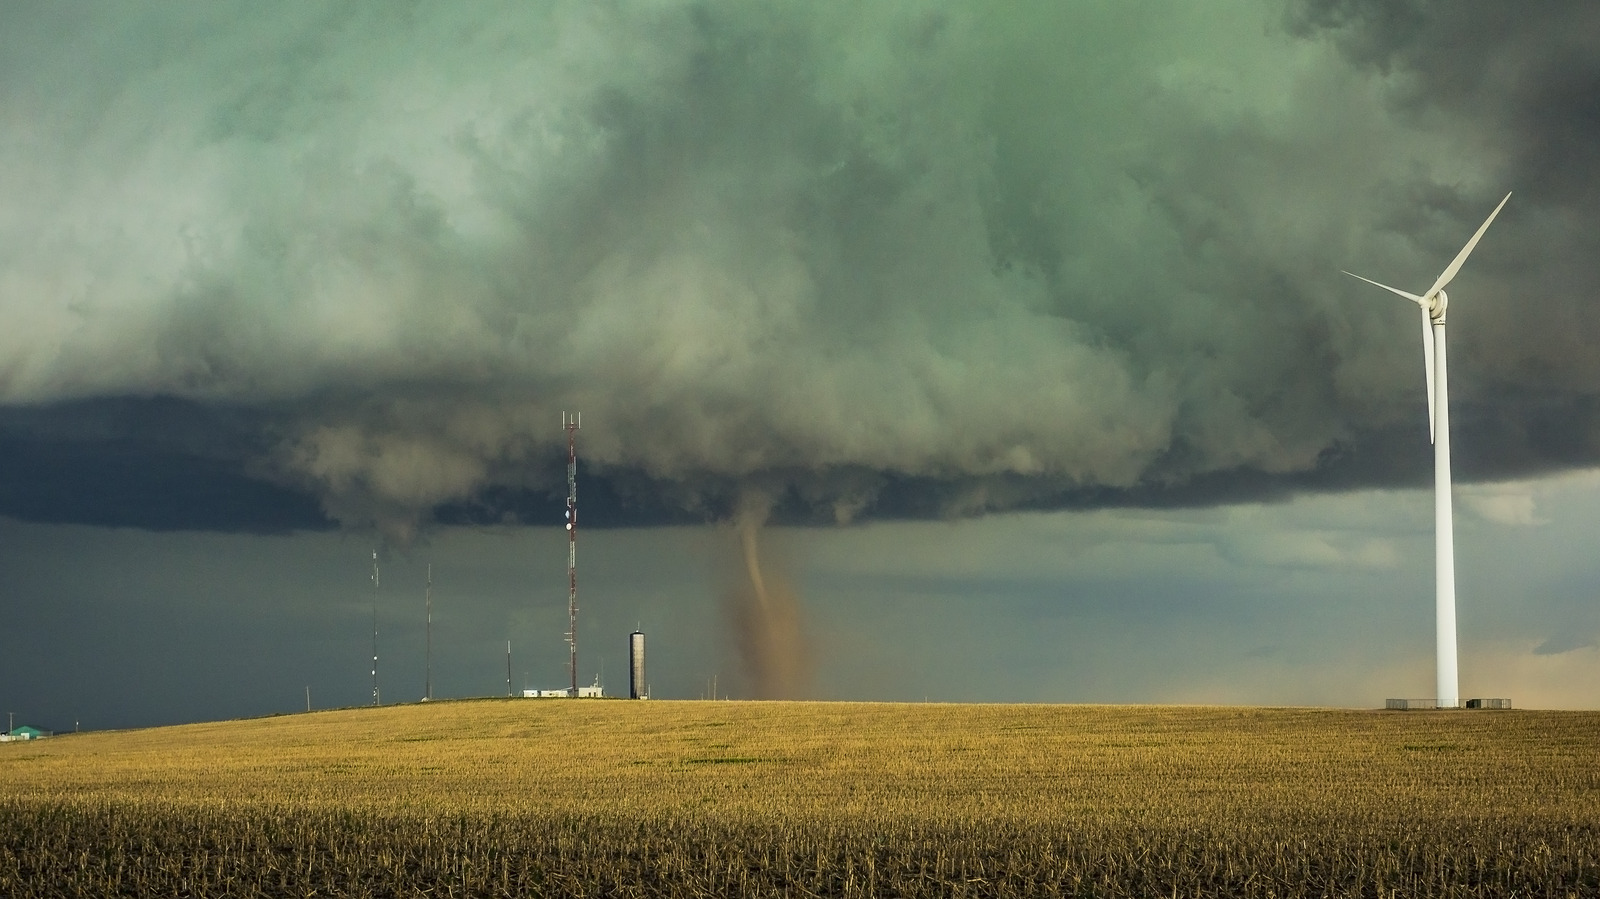 Where Is Tornado Alley, And How Did It Get Its Name?